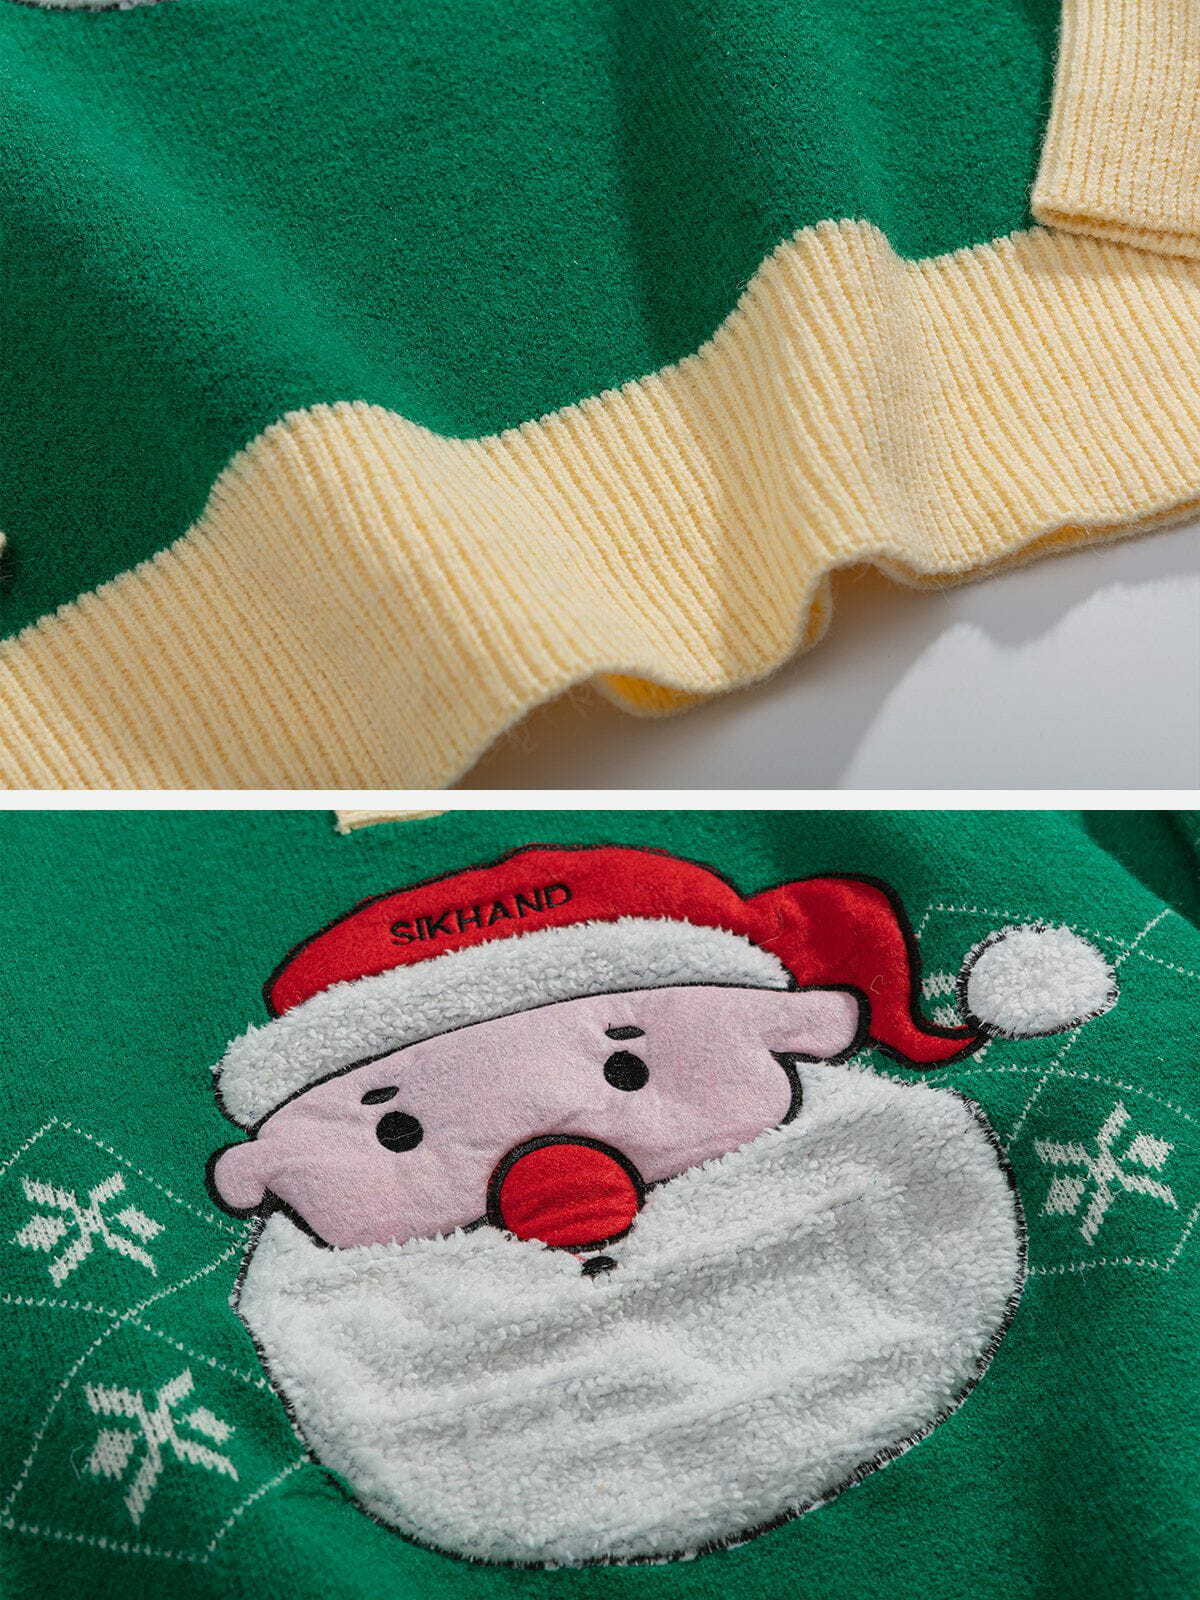 festive santa claus polo sweater playful & vibrant holiday style 6215